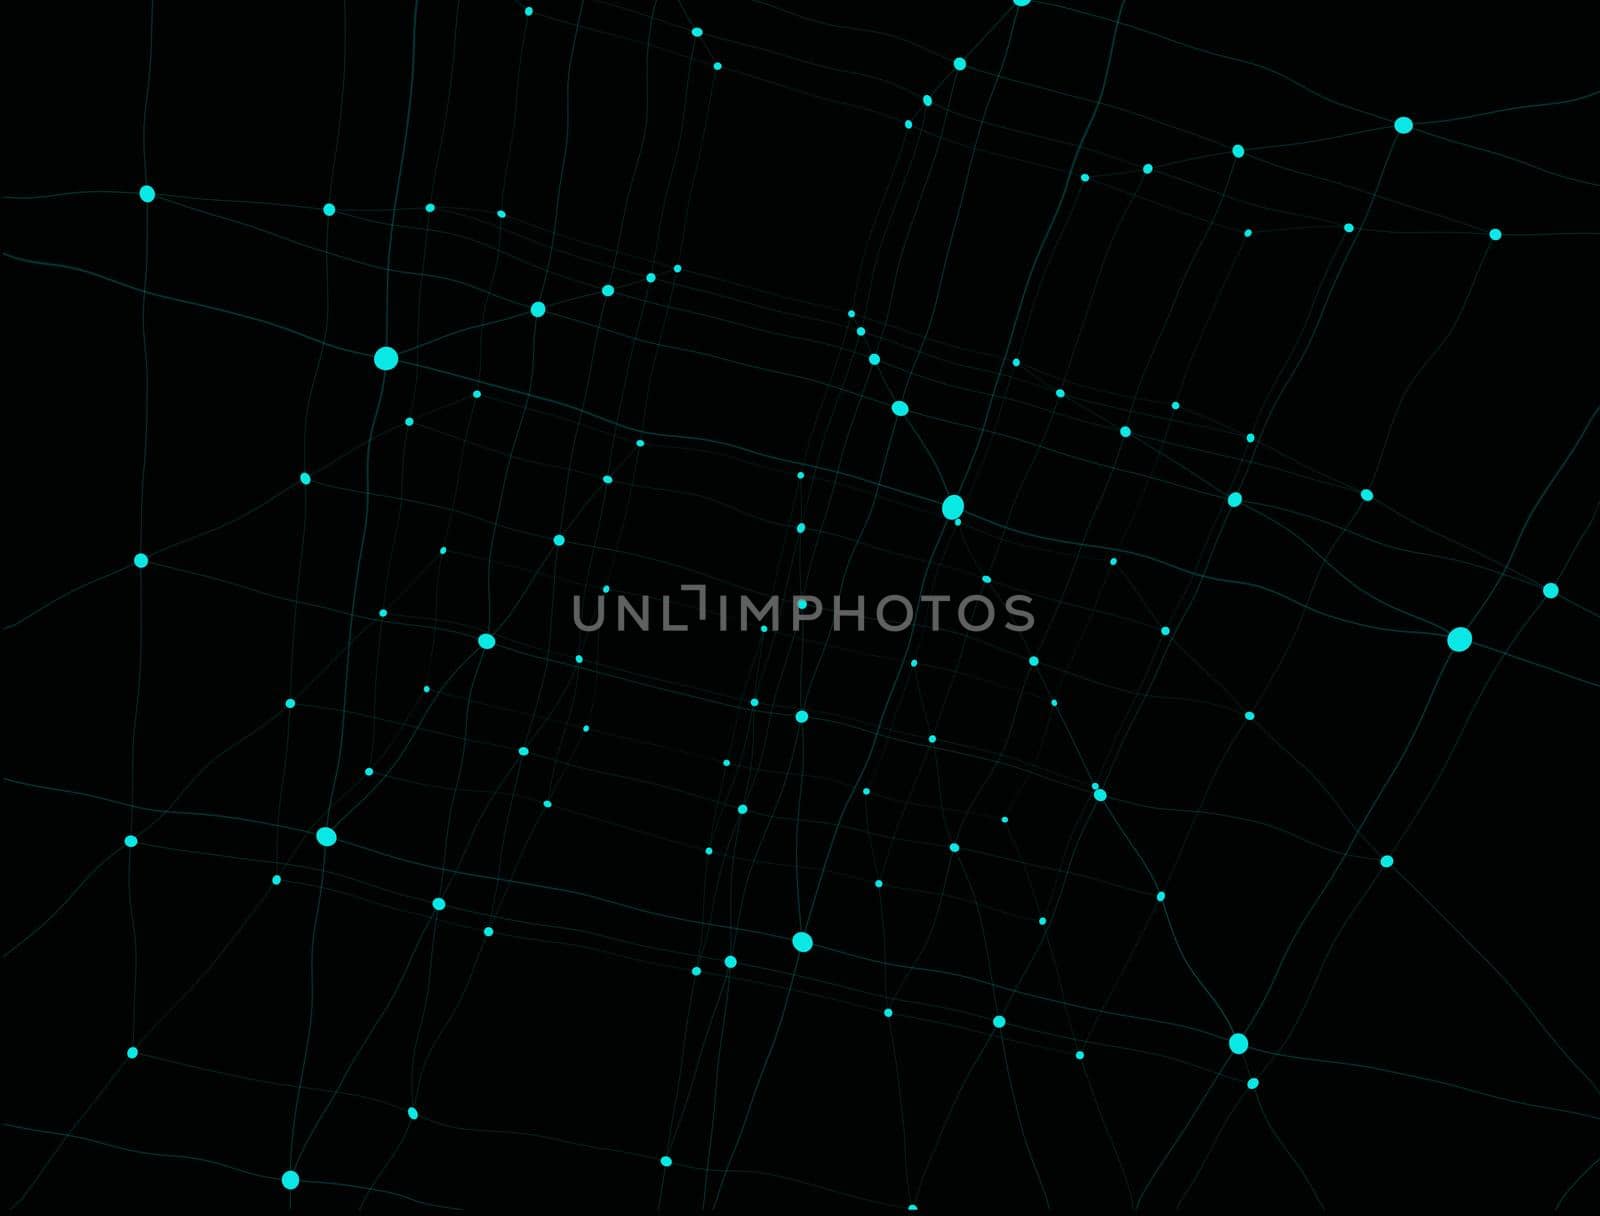 Trendy line art advertising with abstract lines on dark background for decoration design. Graphic design geometric shape. Graphic abstract background. Structure pattern technology backdrop.